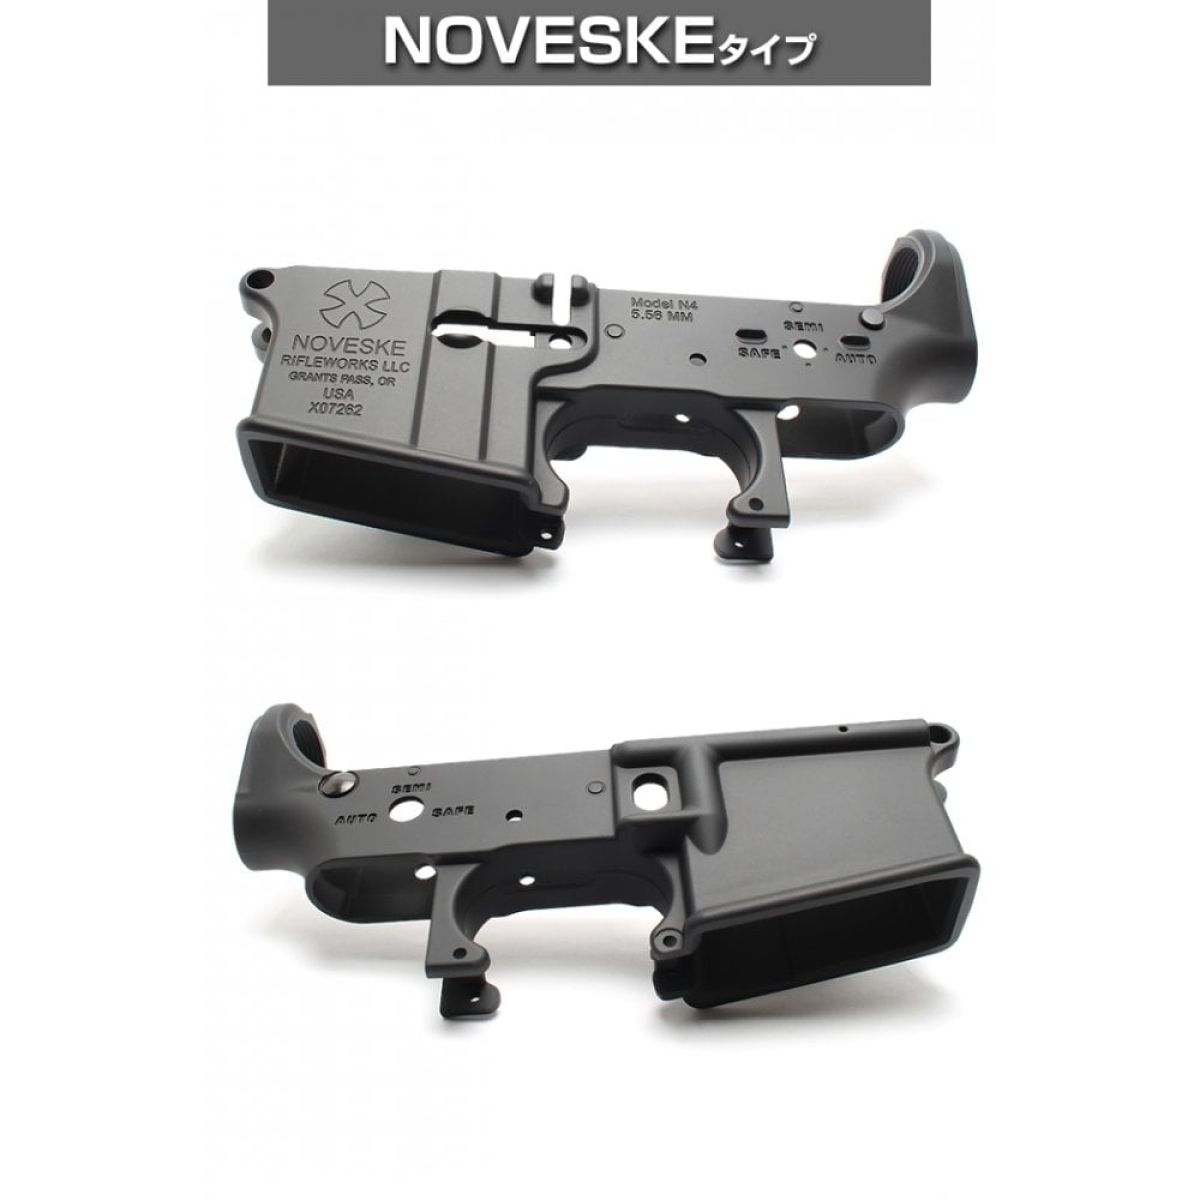 Laylax First Factory Next Generation M4 Mg Metal Lower Frame Noveske Type